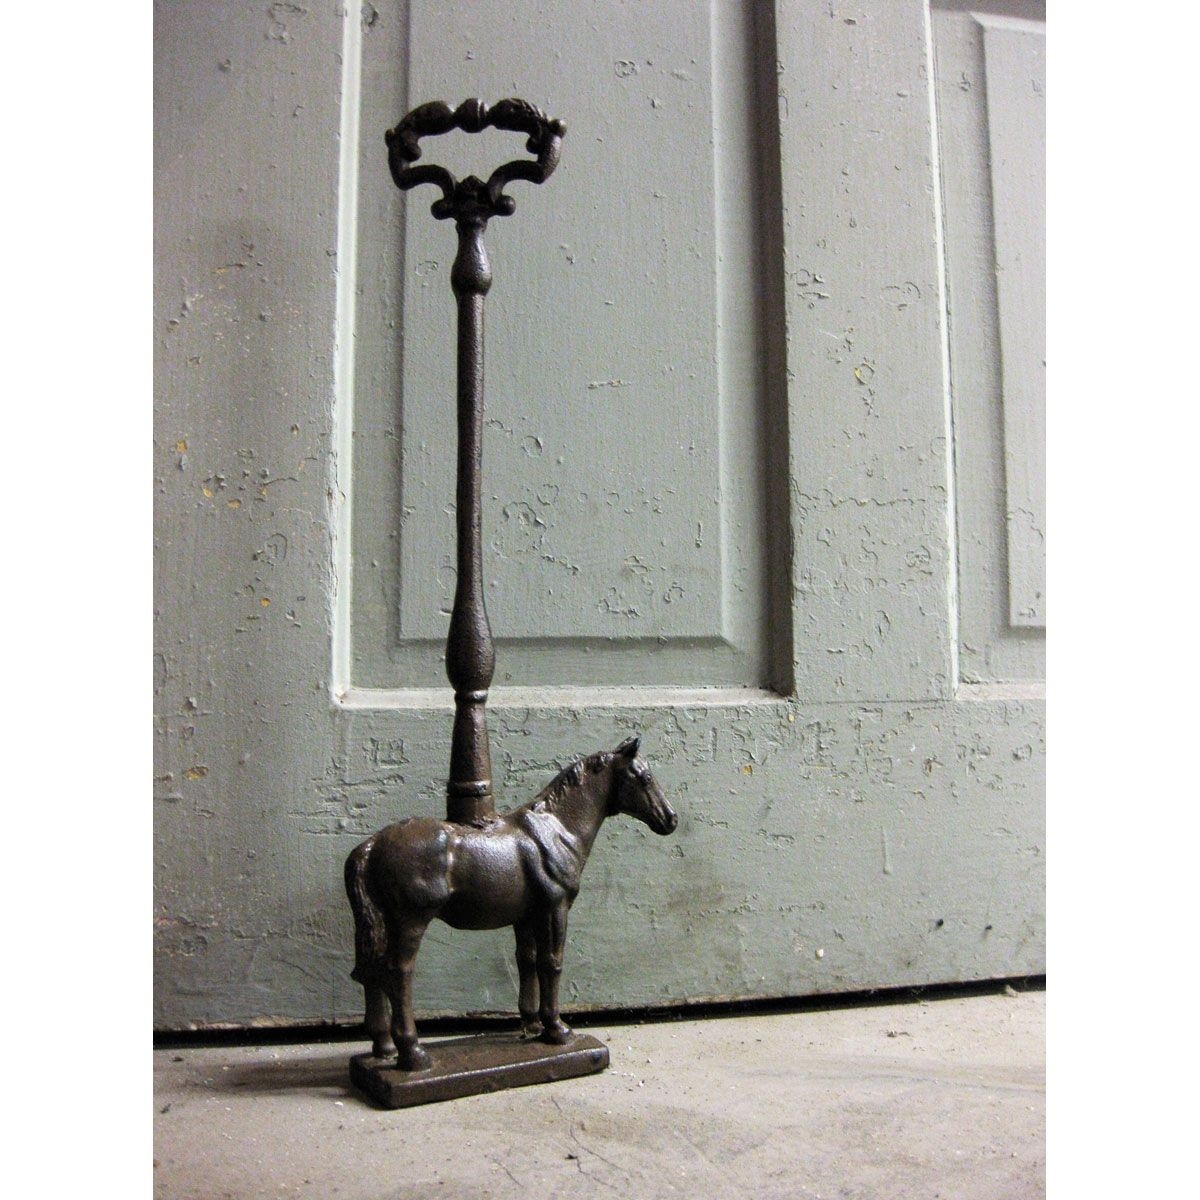 I love this doorstop try to find uncles silver horse